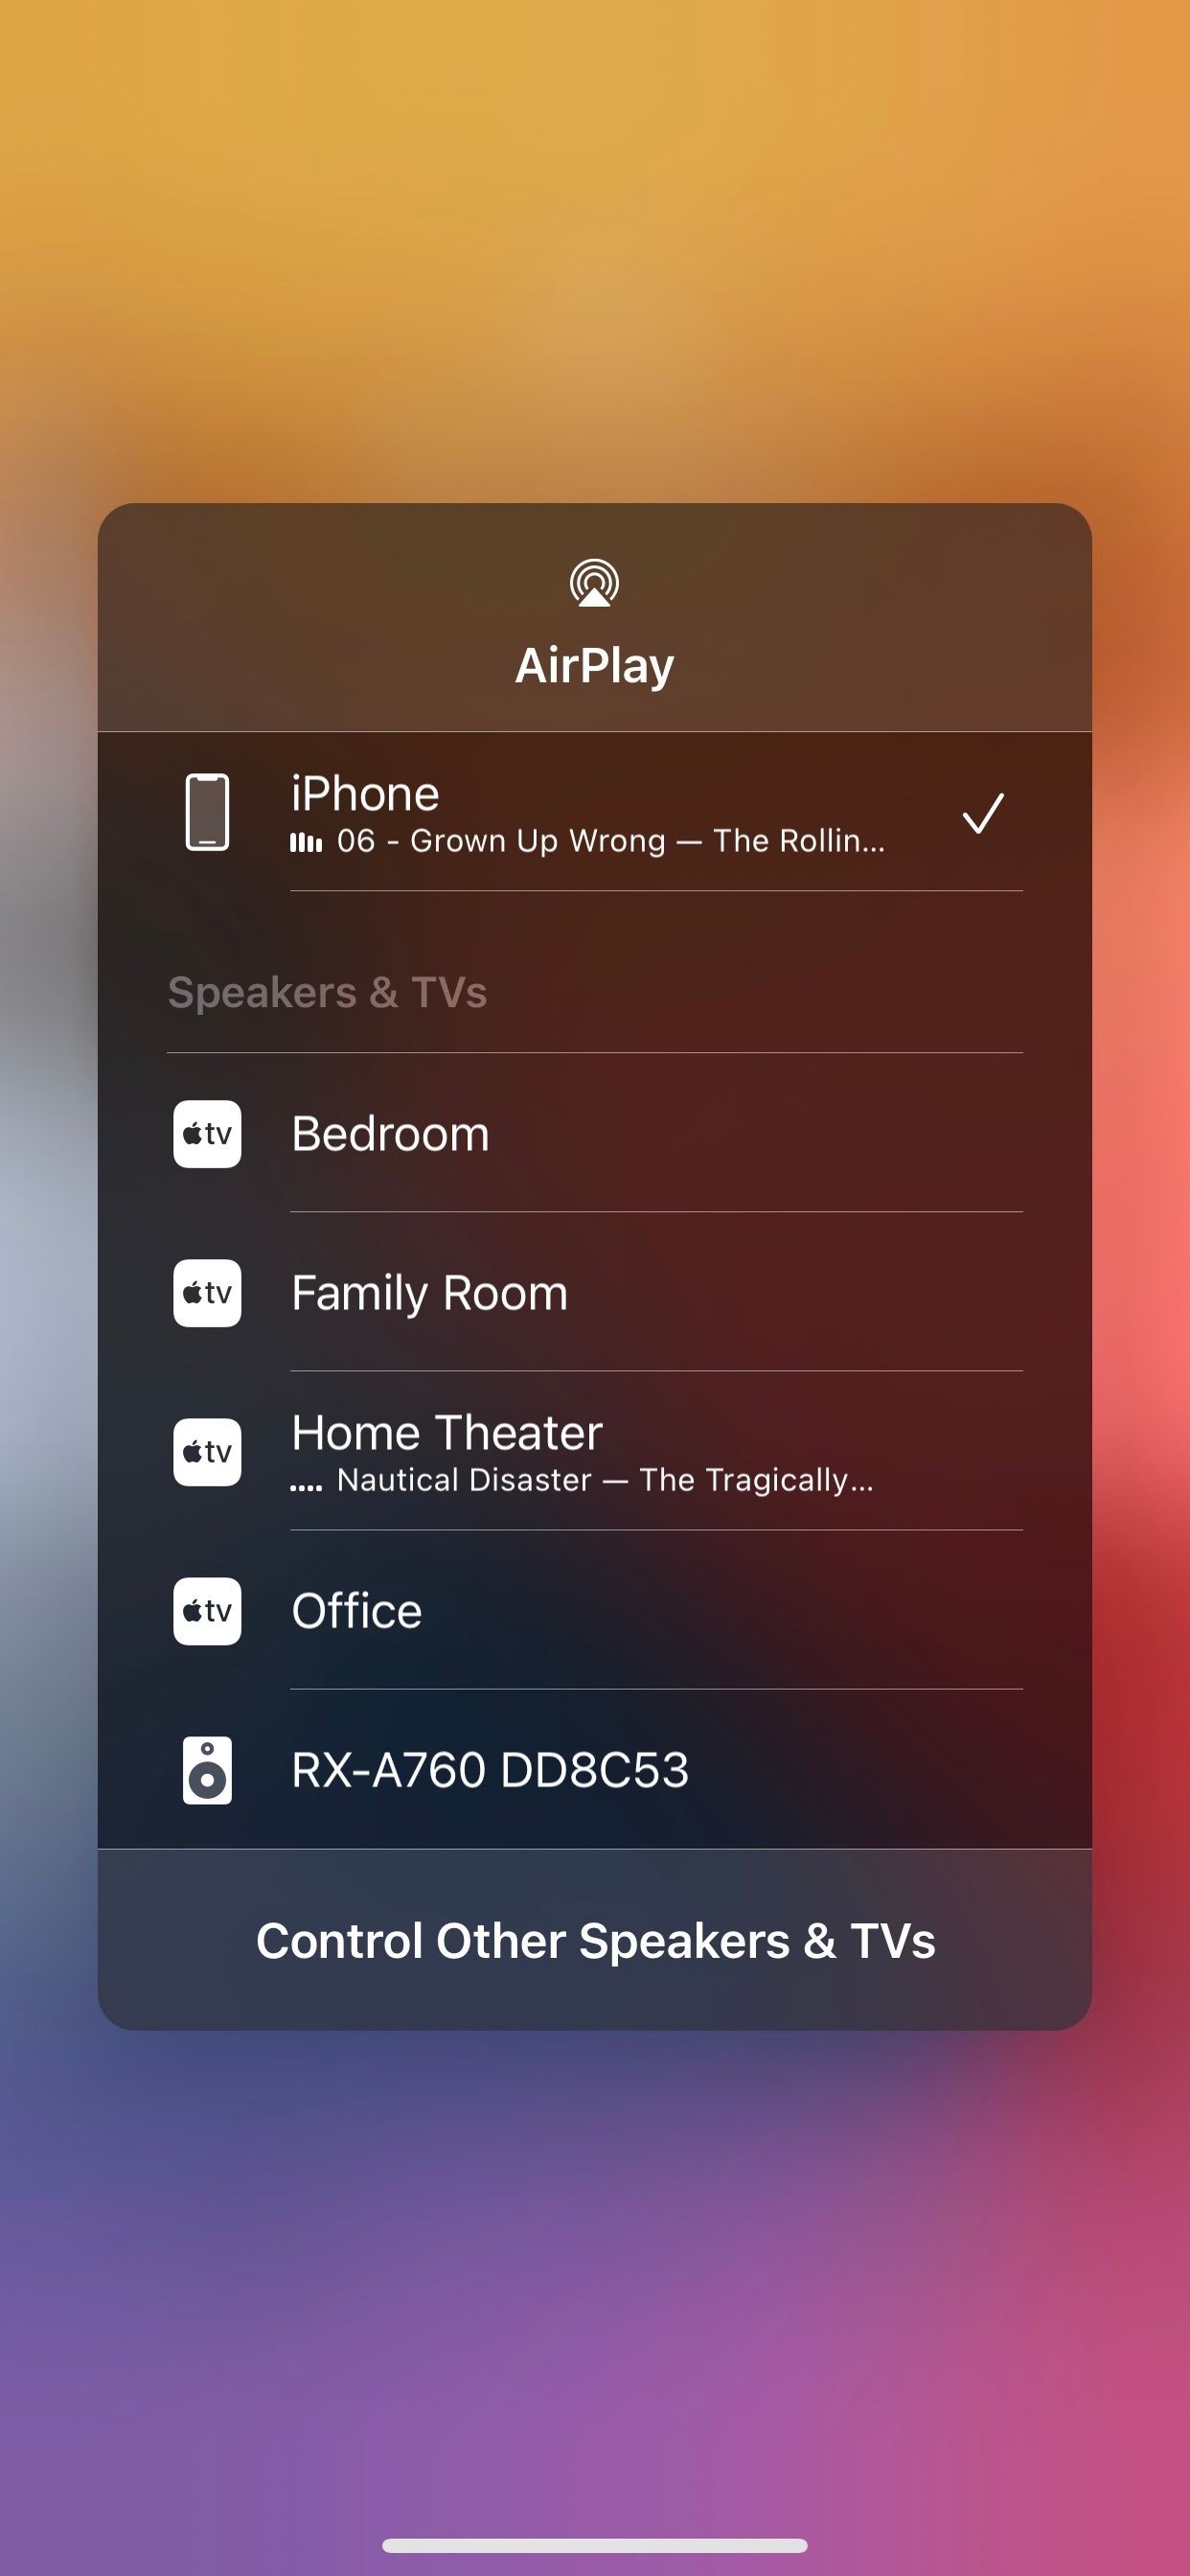 Neuropati Billy udredning why is Sonos showing as iphone on lockscreen. | Sonos Community